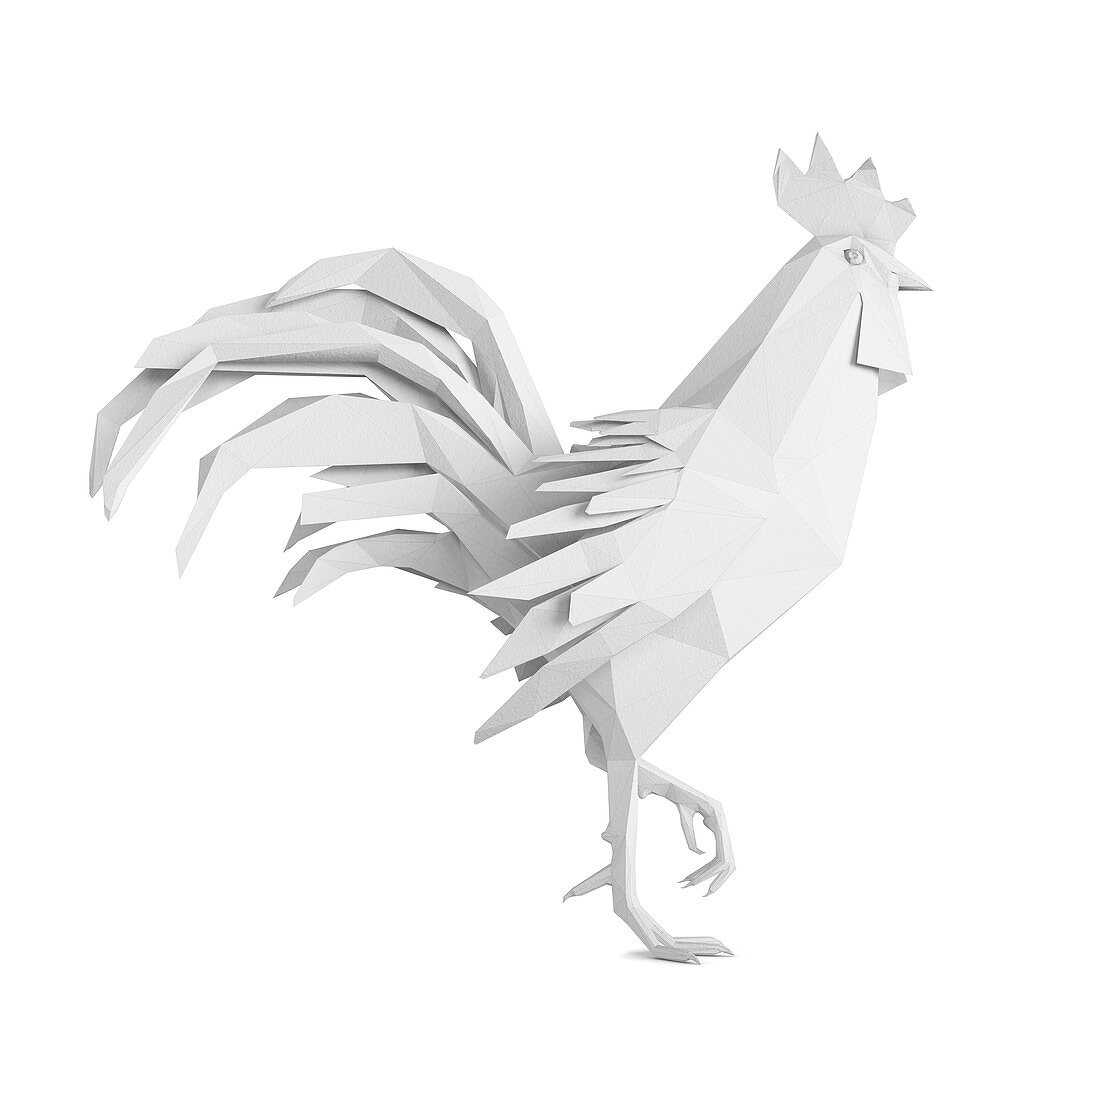 Origami rooster, illustration